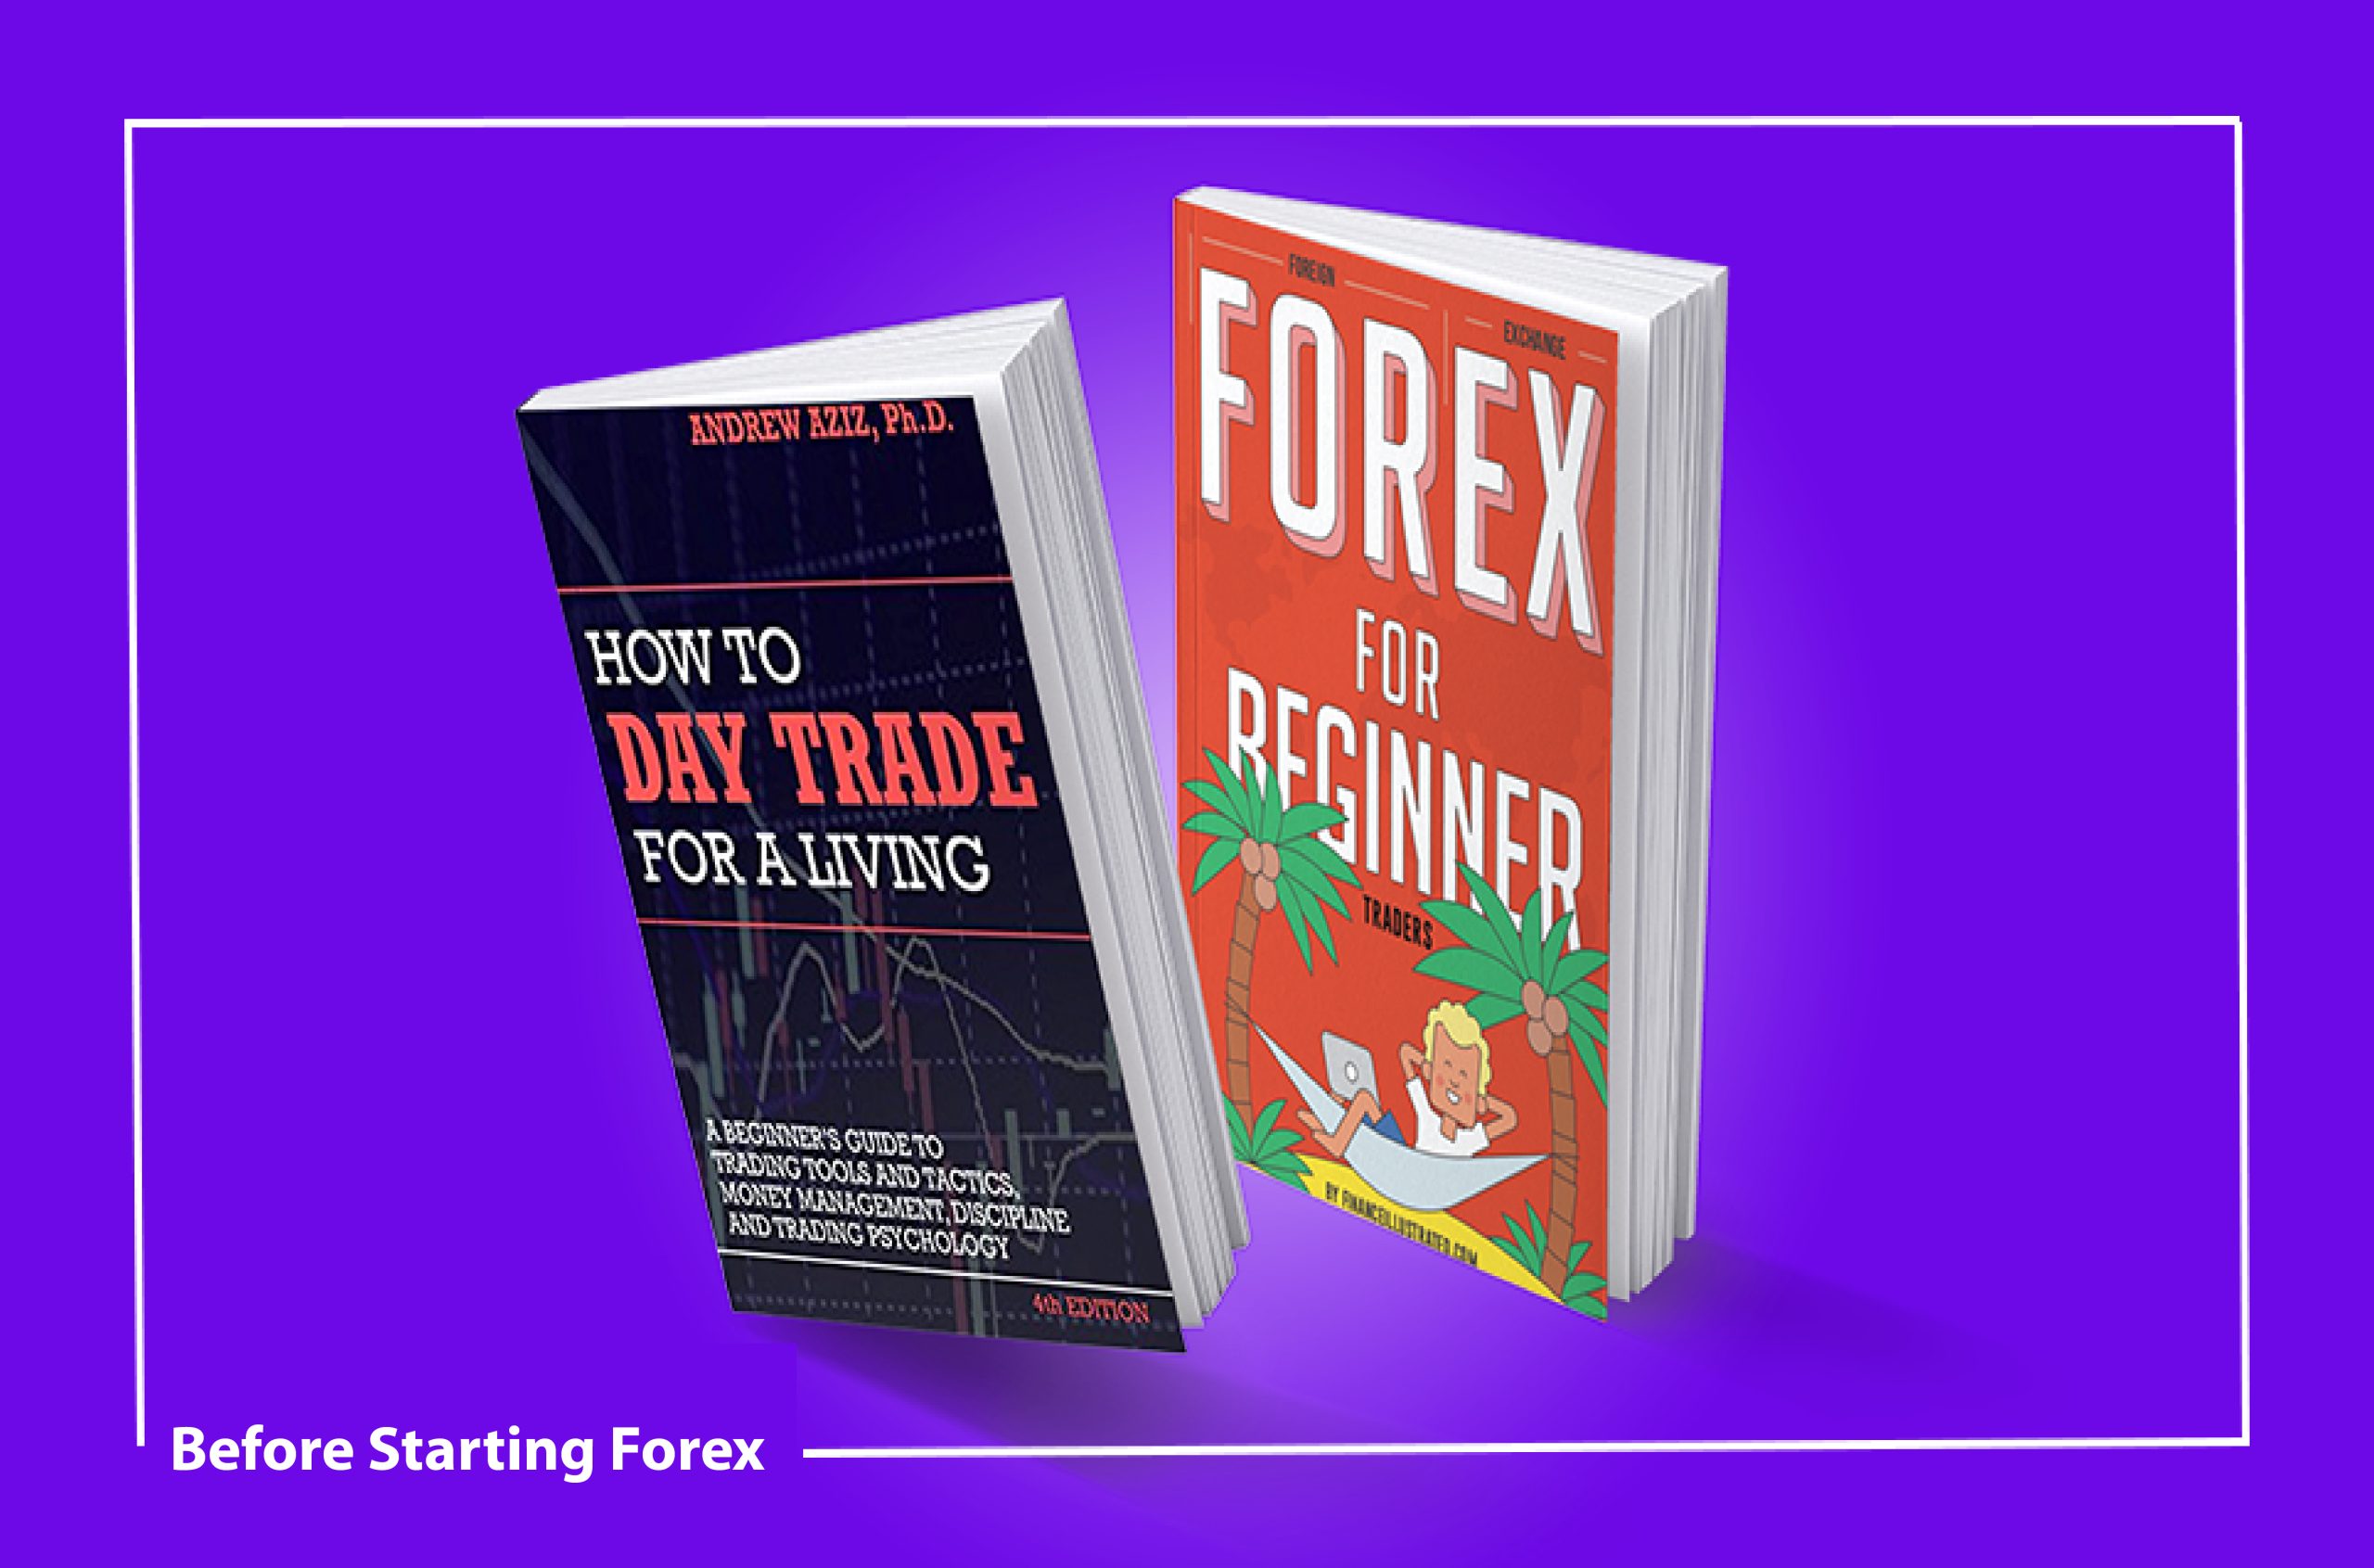 “7 Books Recommended By Warren Buffett That Beginners Should Read Before Starting Forex!”